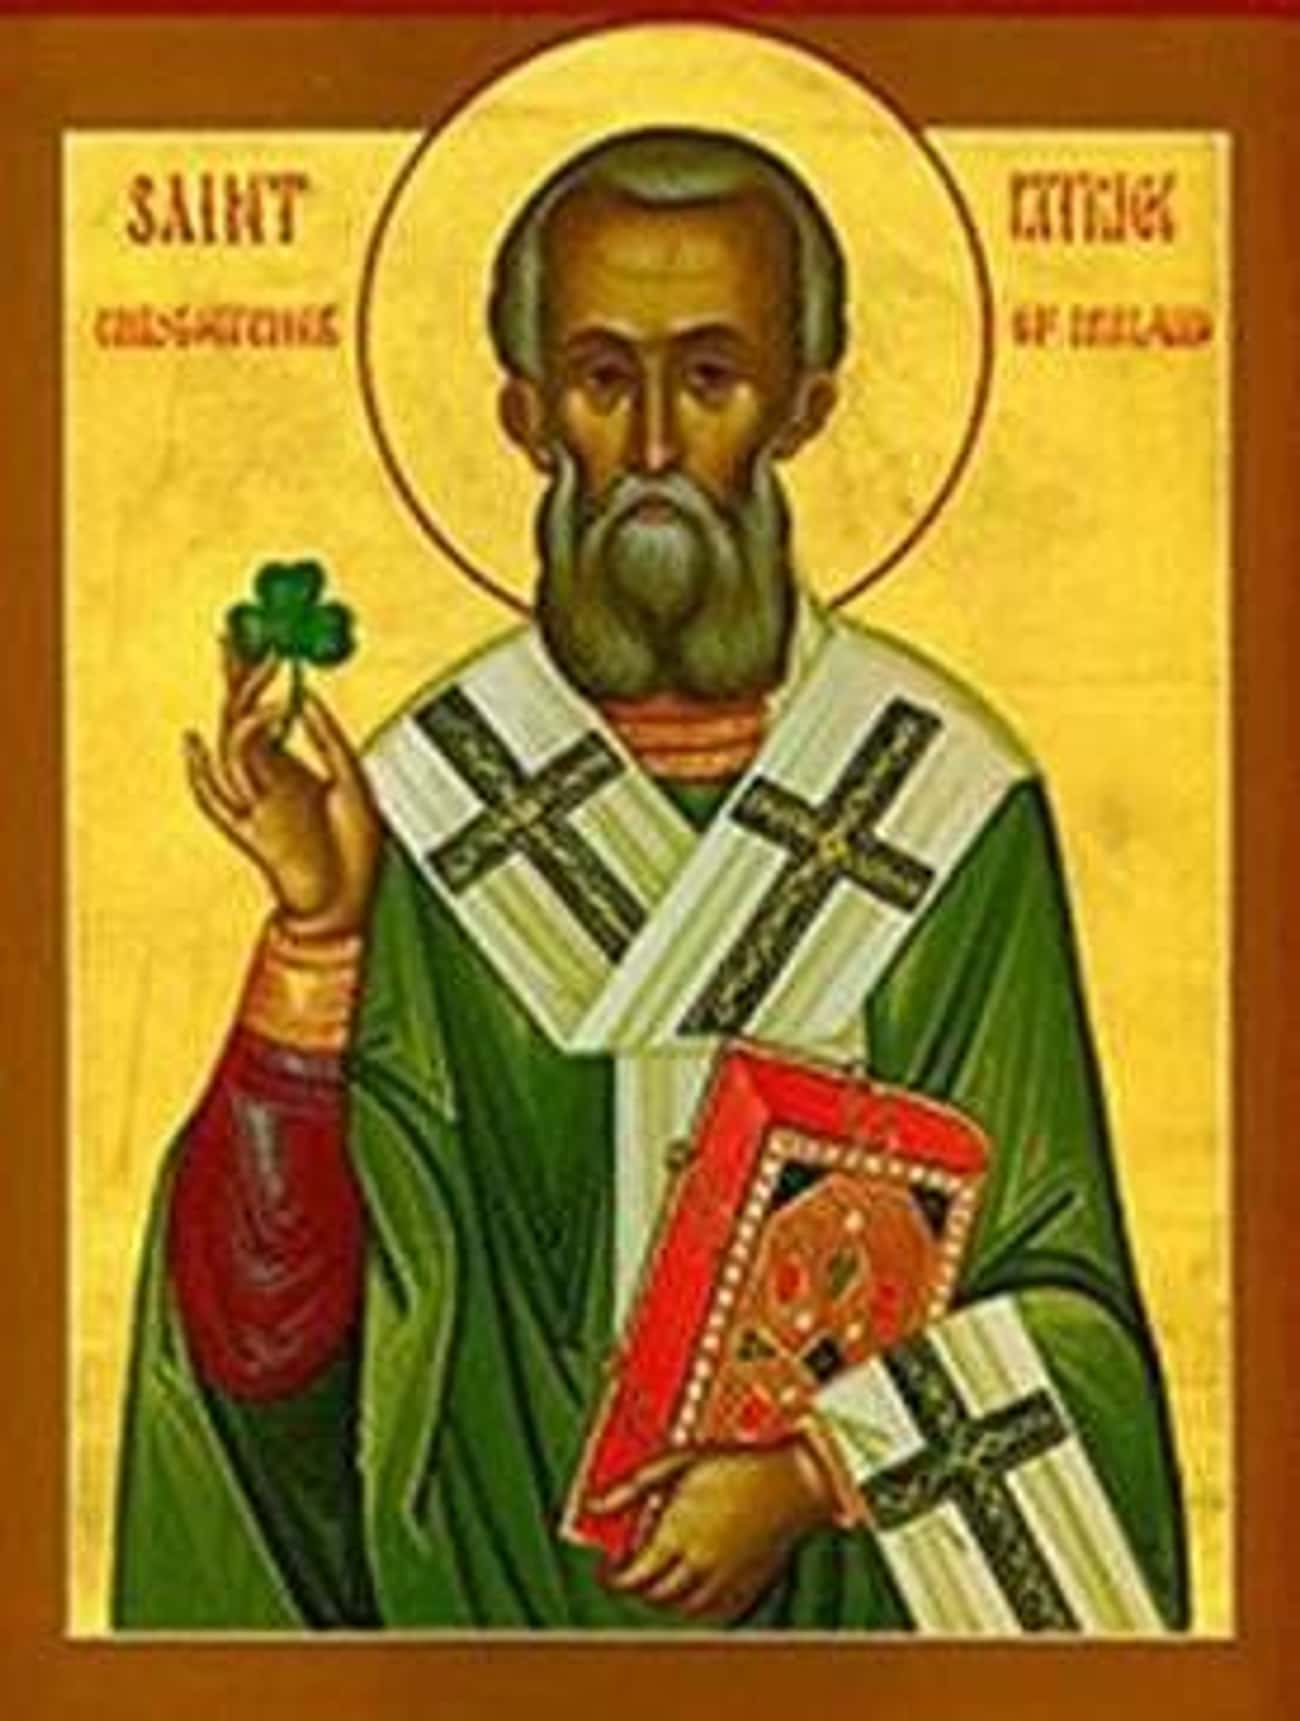 St. Patrick Found Christianity After Being Snatched By Irish Pirates